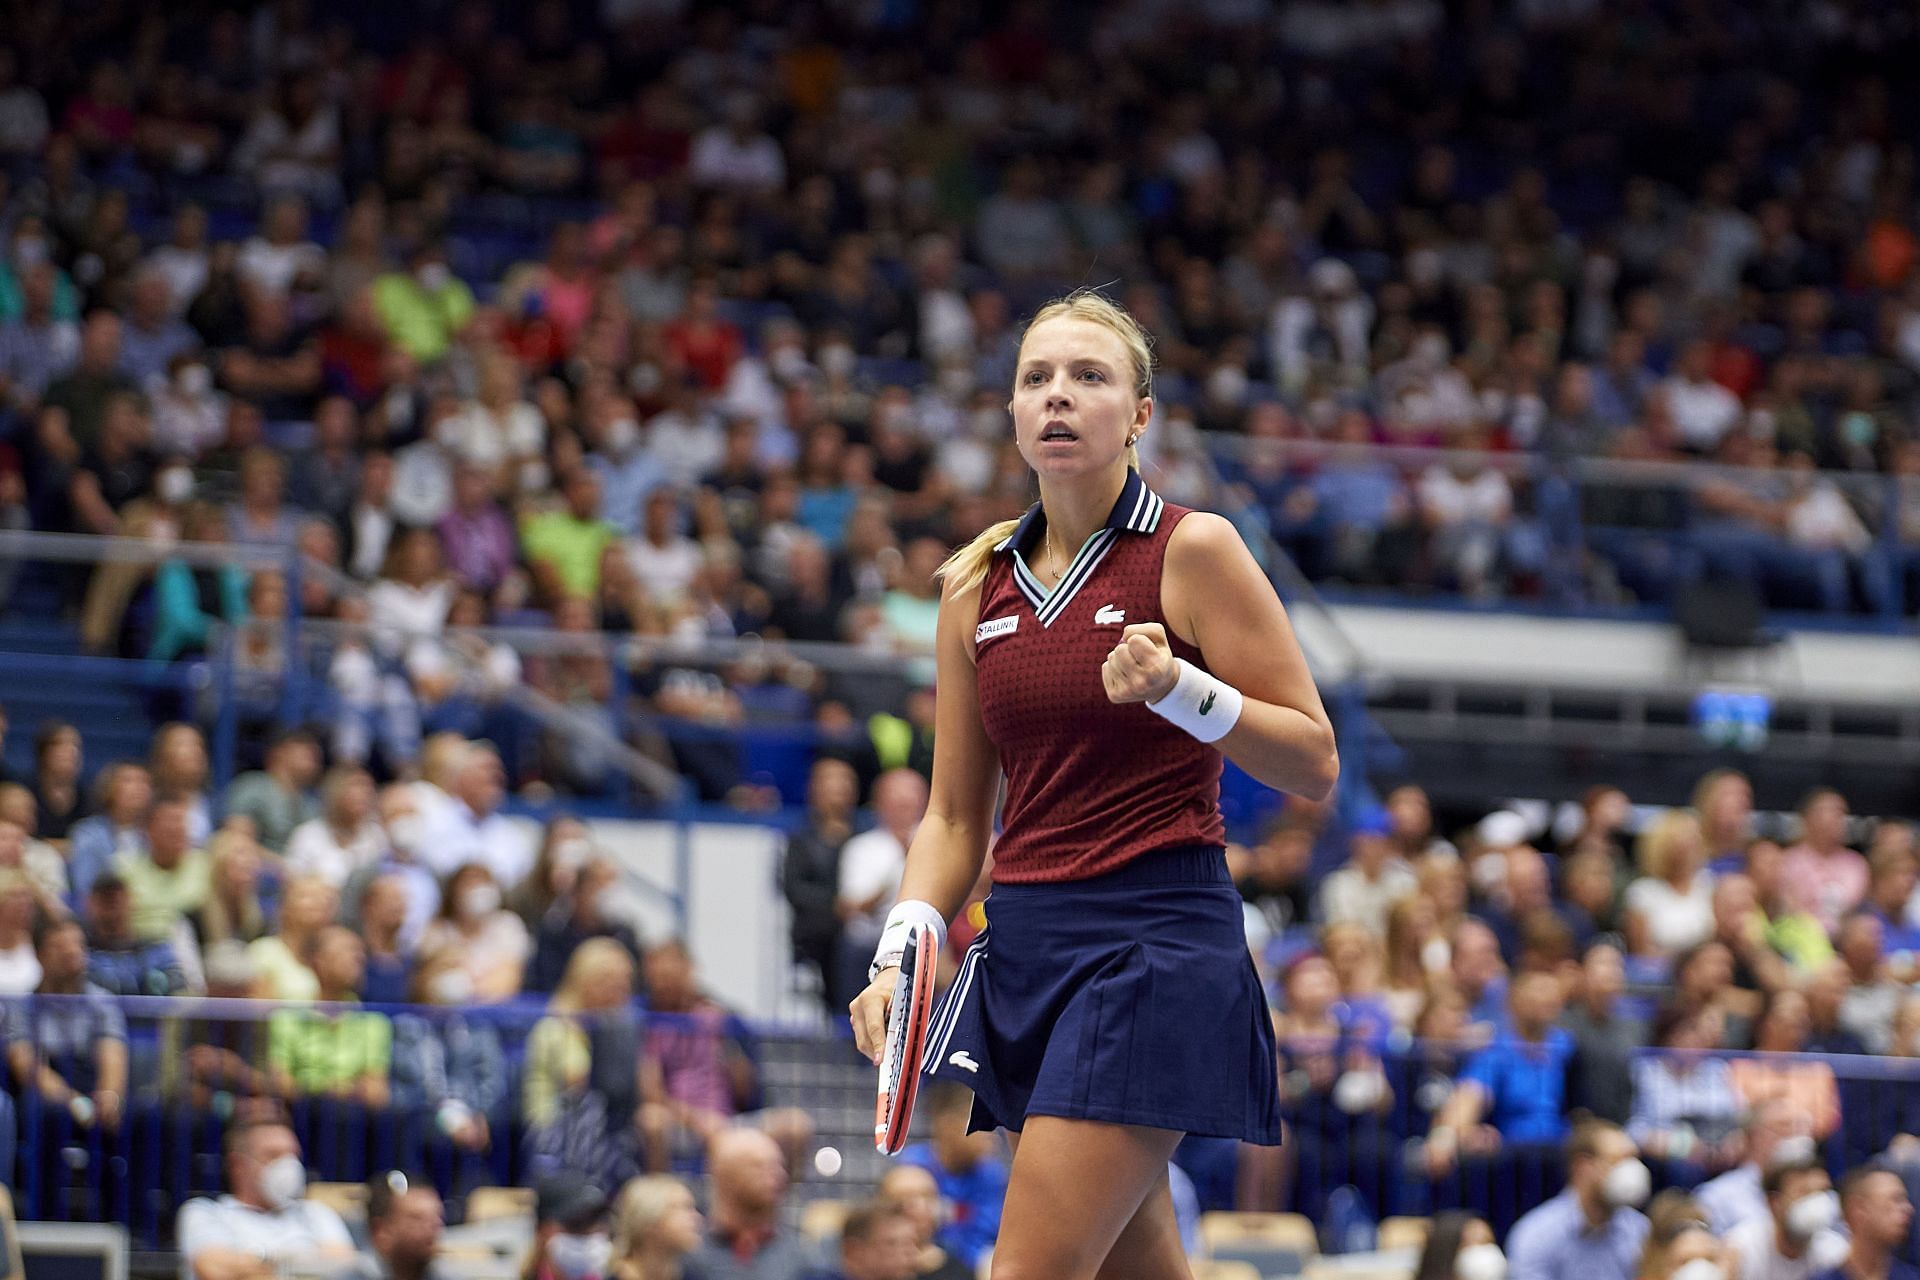 Kontaveit overcame Jaqueline Cristian in her opening match.